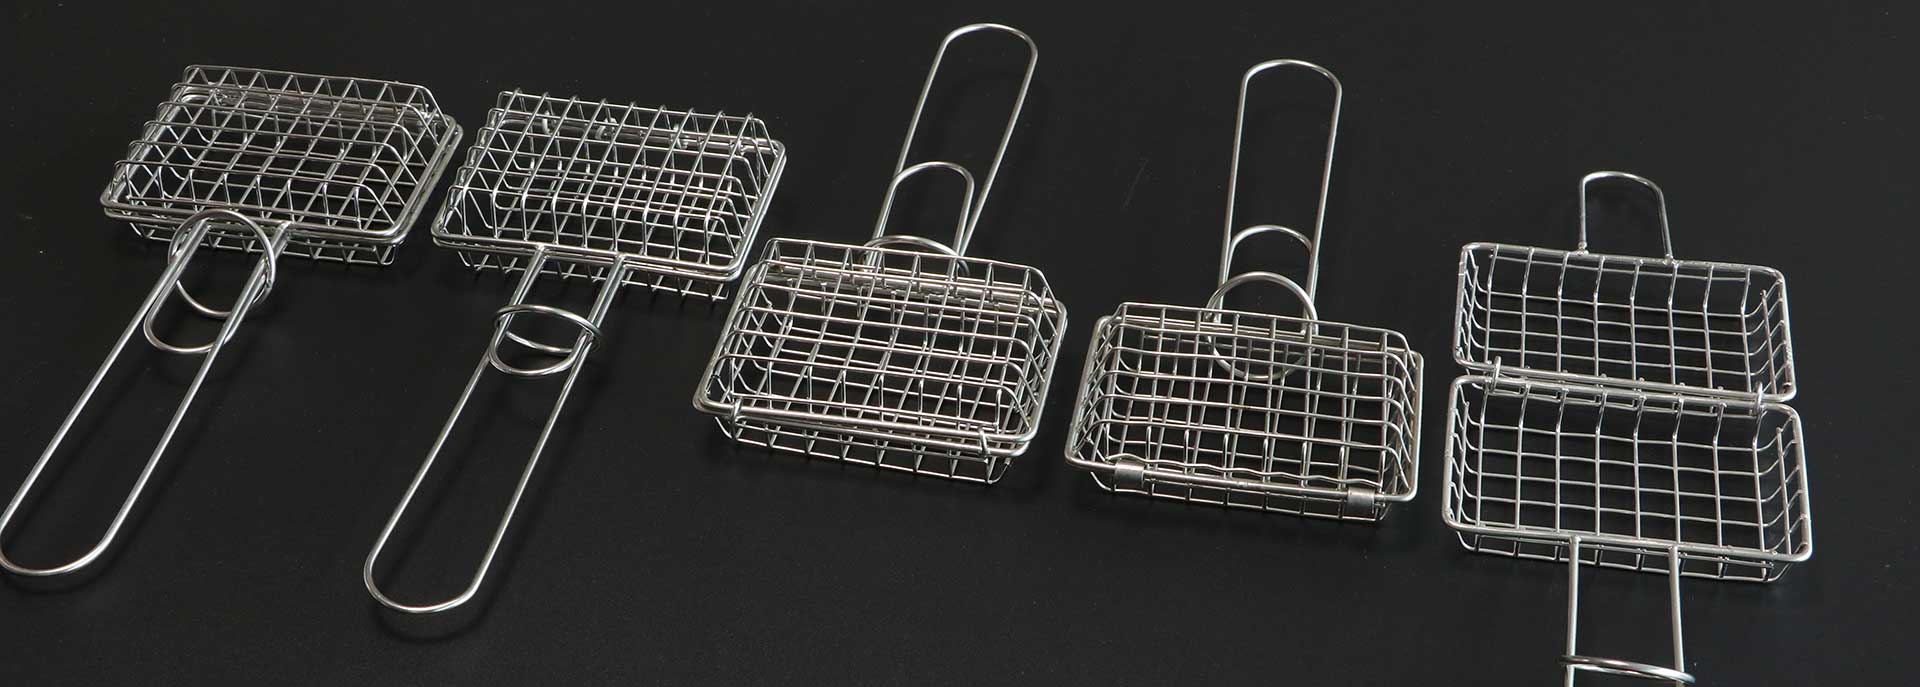 Soap Cage | Soap Saver | Soap Shaker | Stainless Steel Soap Cage